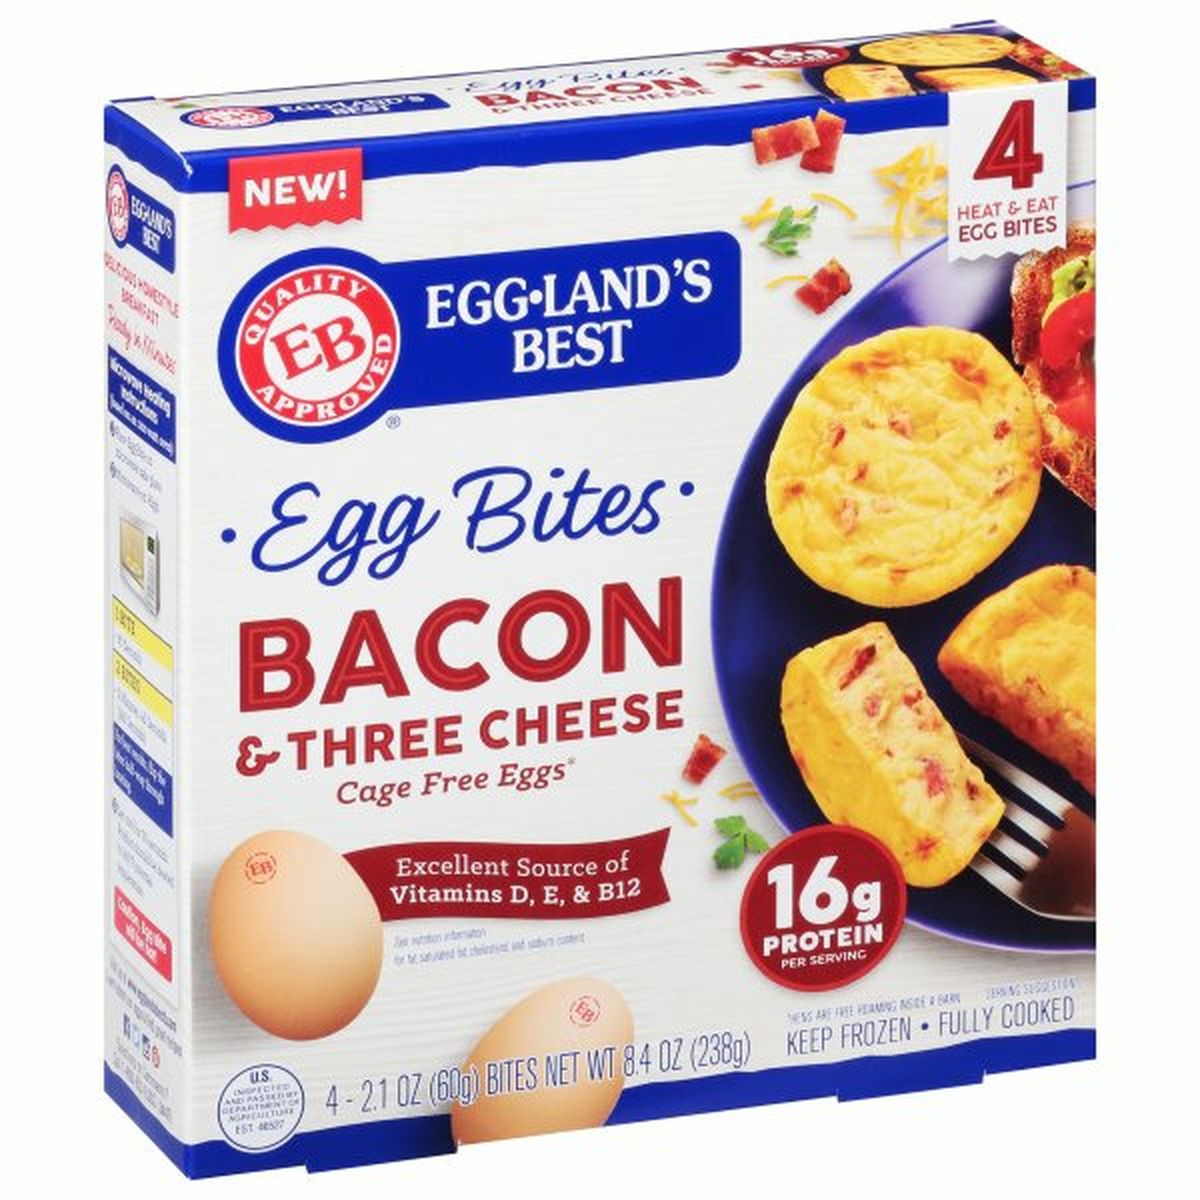 Calories in Eggland's Best Egg Bites, Bacon & Three Cheese